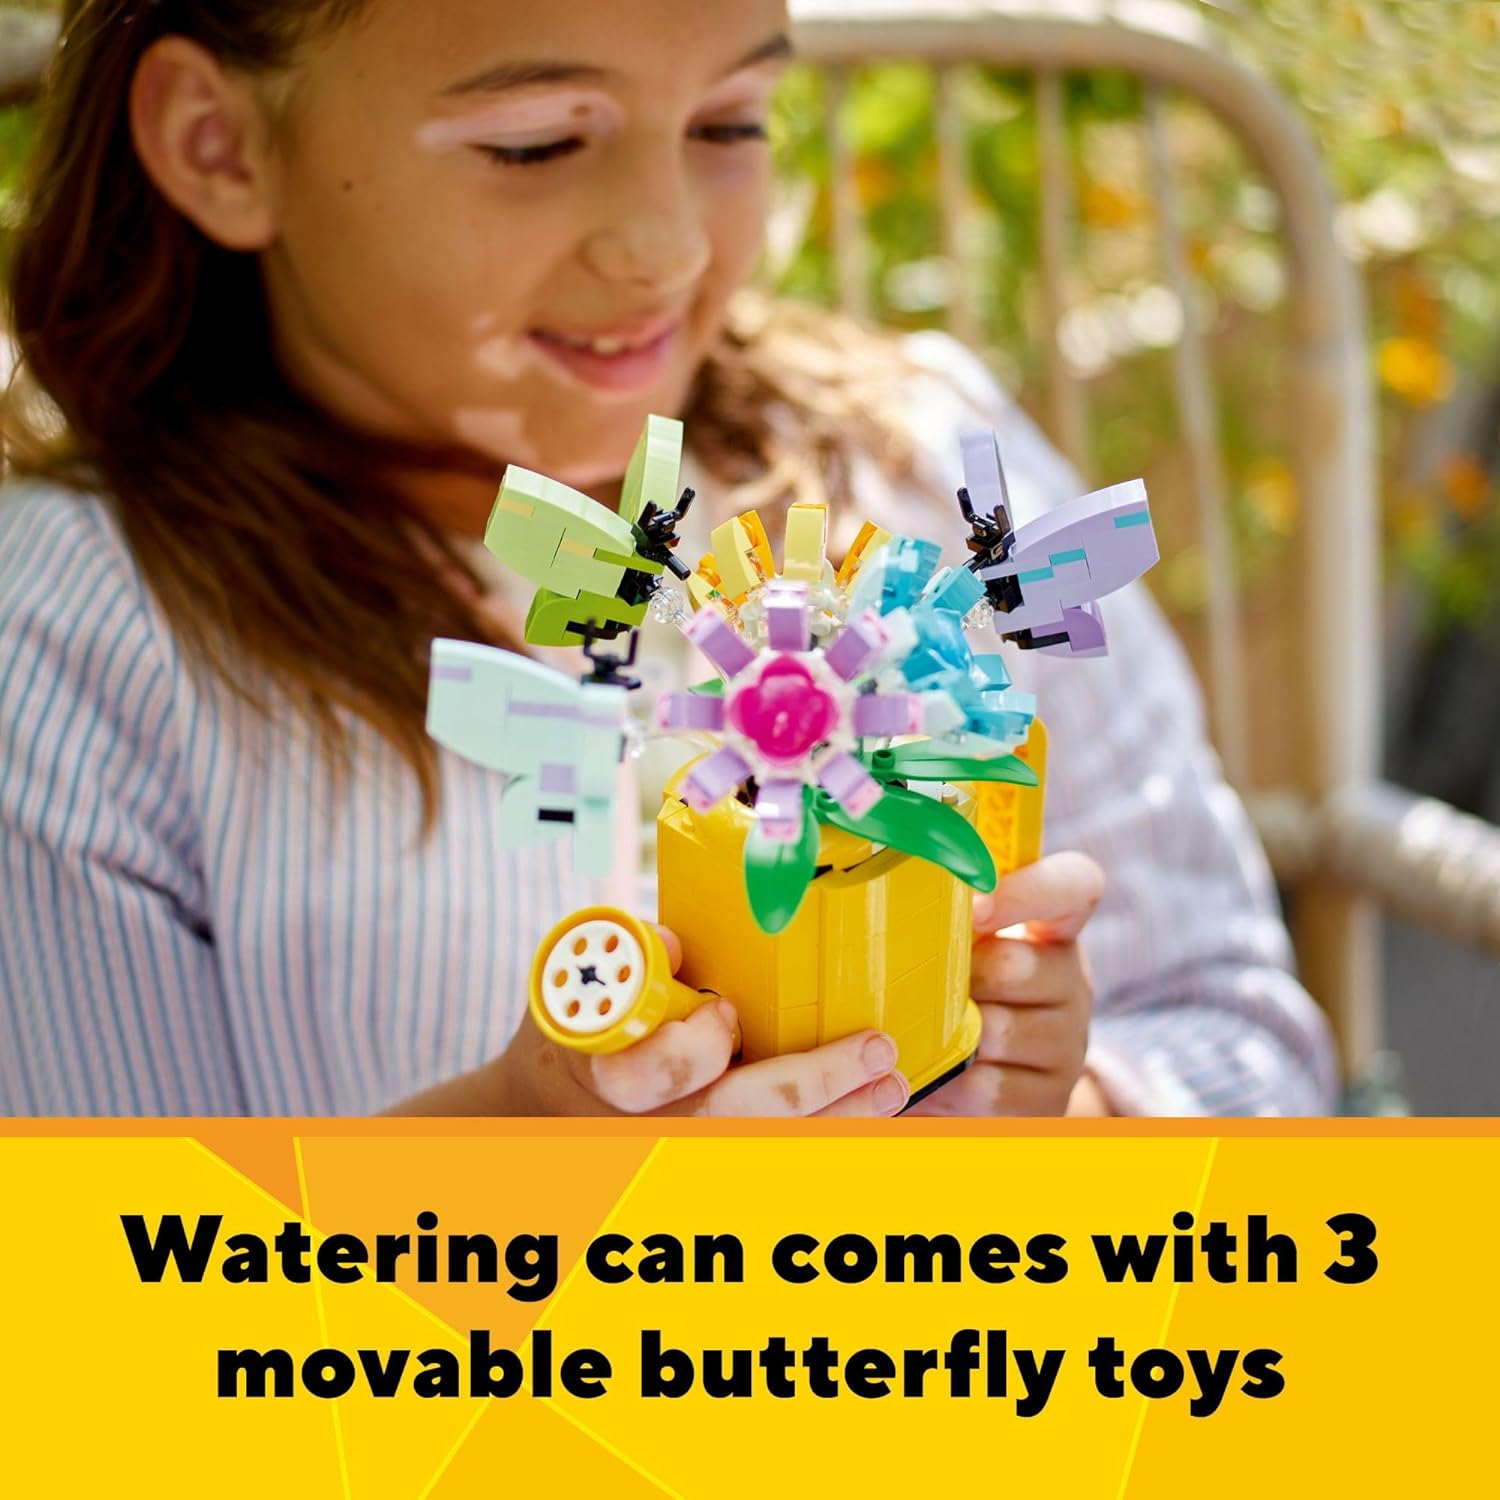 LEGO 31149 Creator 3 in 1 Flowers in Watering Can Building Toy, Transforms into Rain Boot or 2 Birds, Fun Animal Toy Easter Gift for Kids, Easter Basket Stuffers.